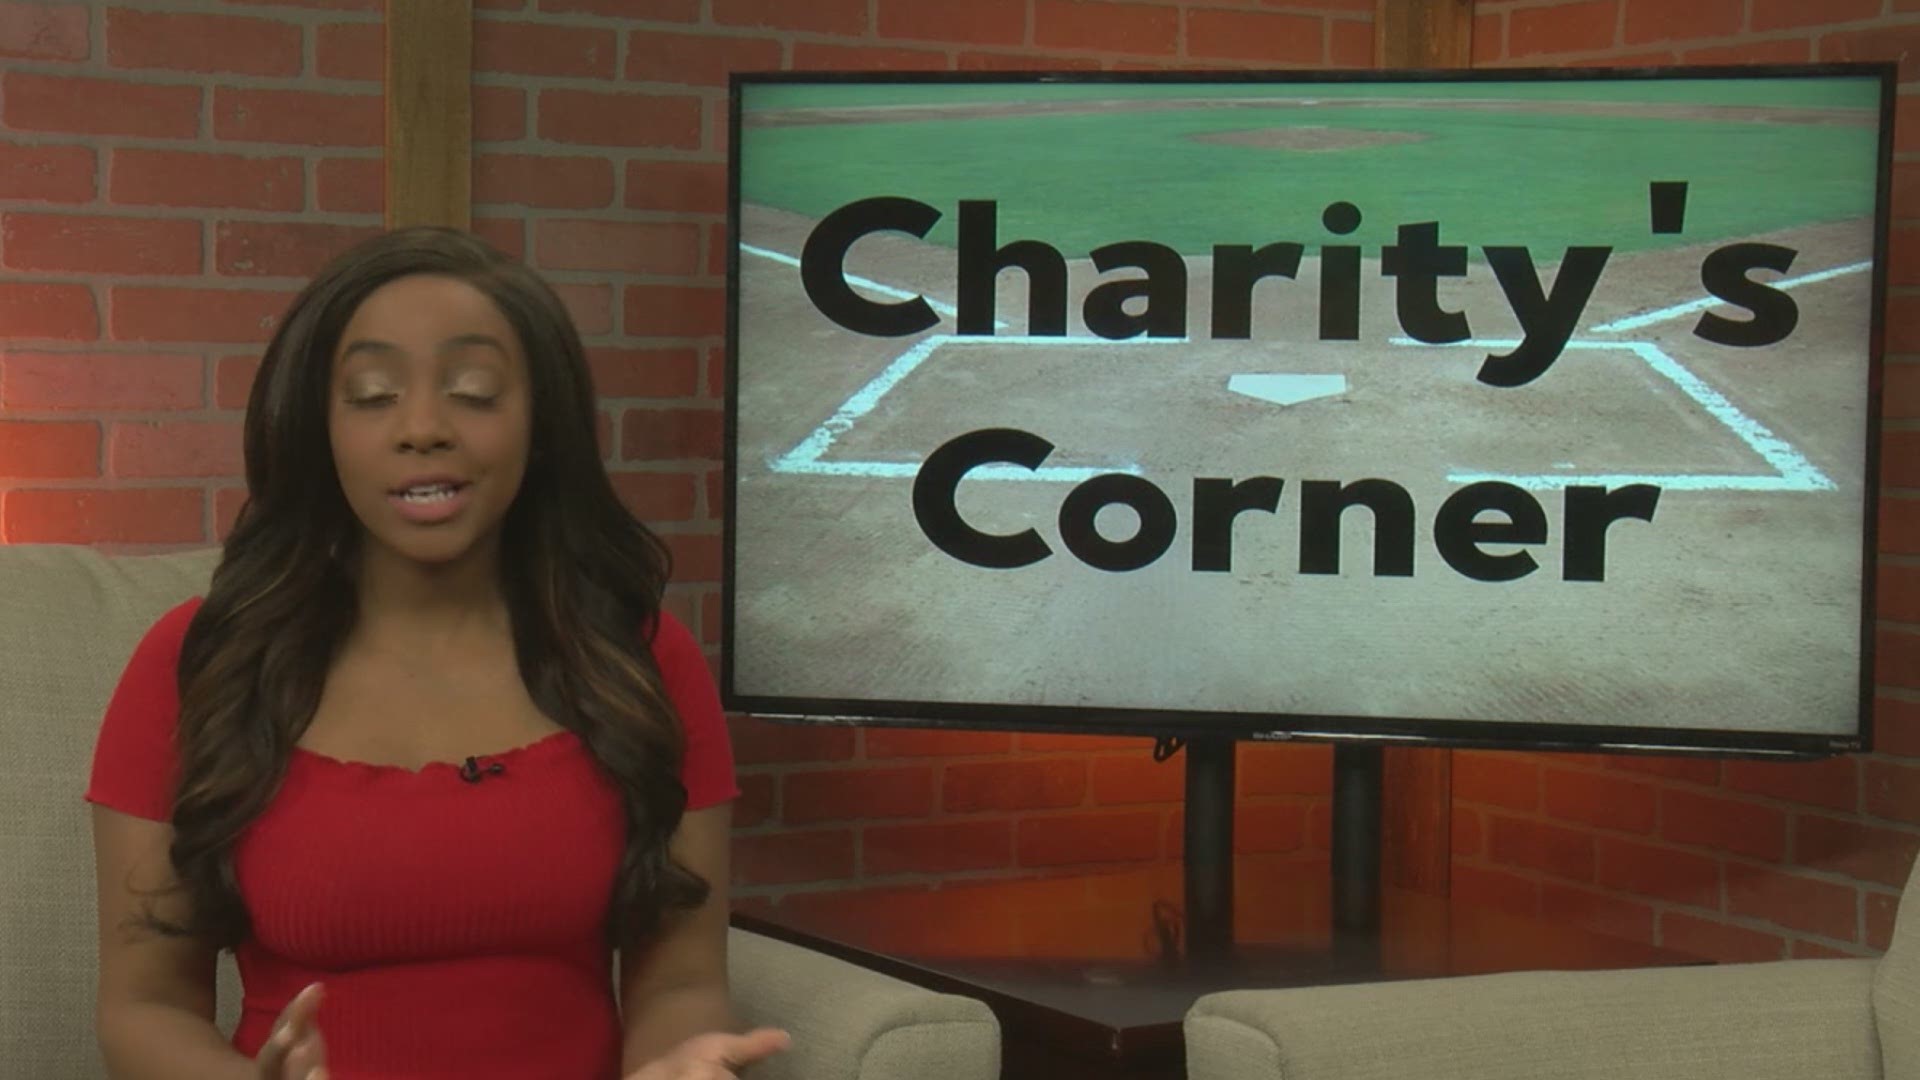 In another segment of Charity's Corner, WZDX Sports Anchor Charity Chambers gives a heartfelt tribute on the impact sports has on the world.